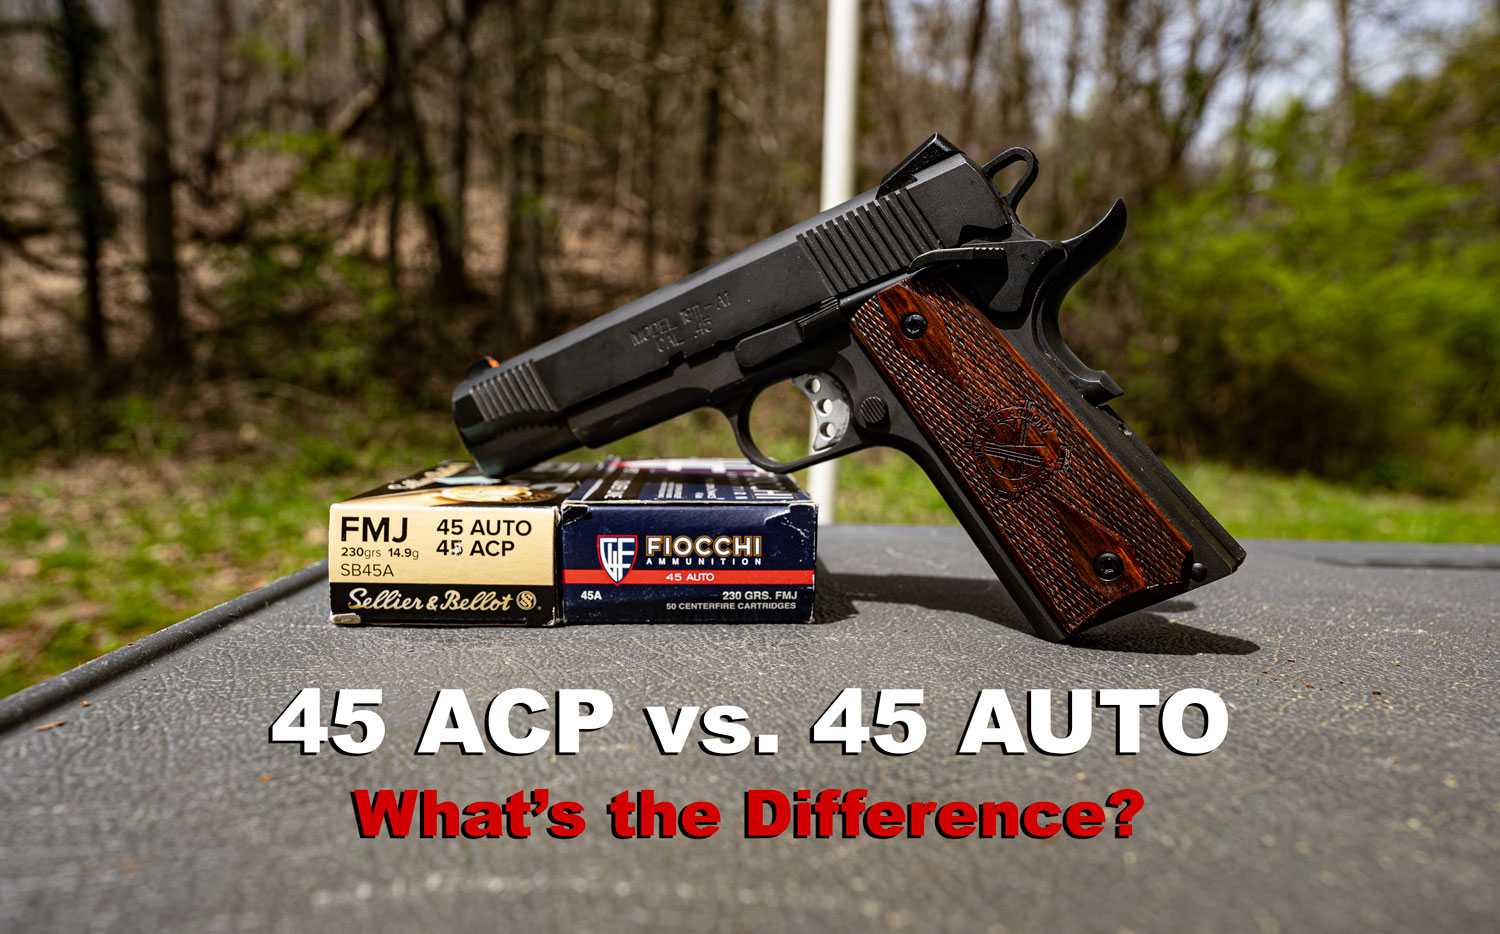 45 Auto vs. 45 ACP: What's the Difference?